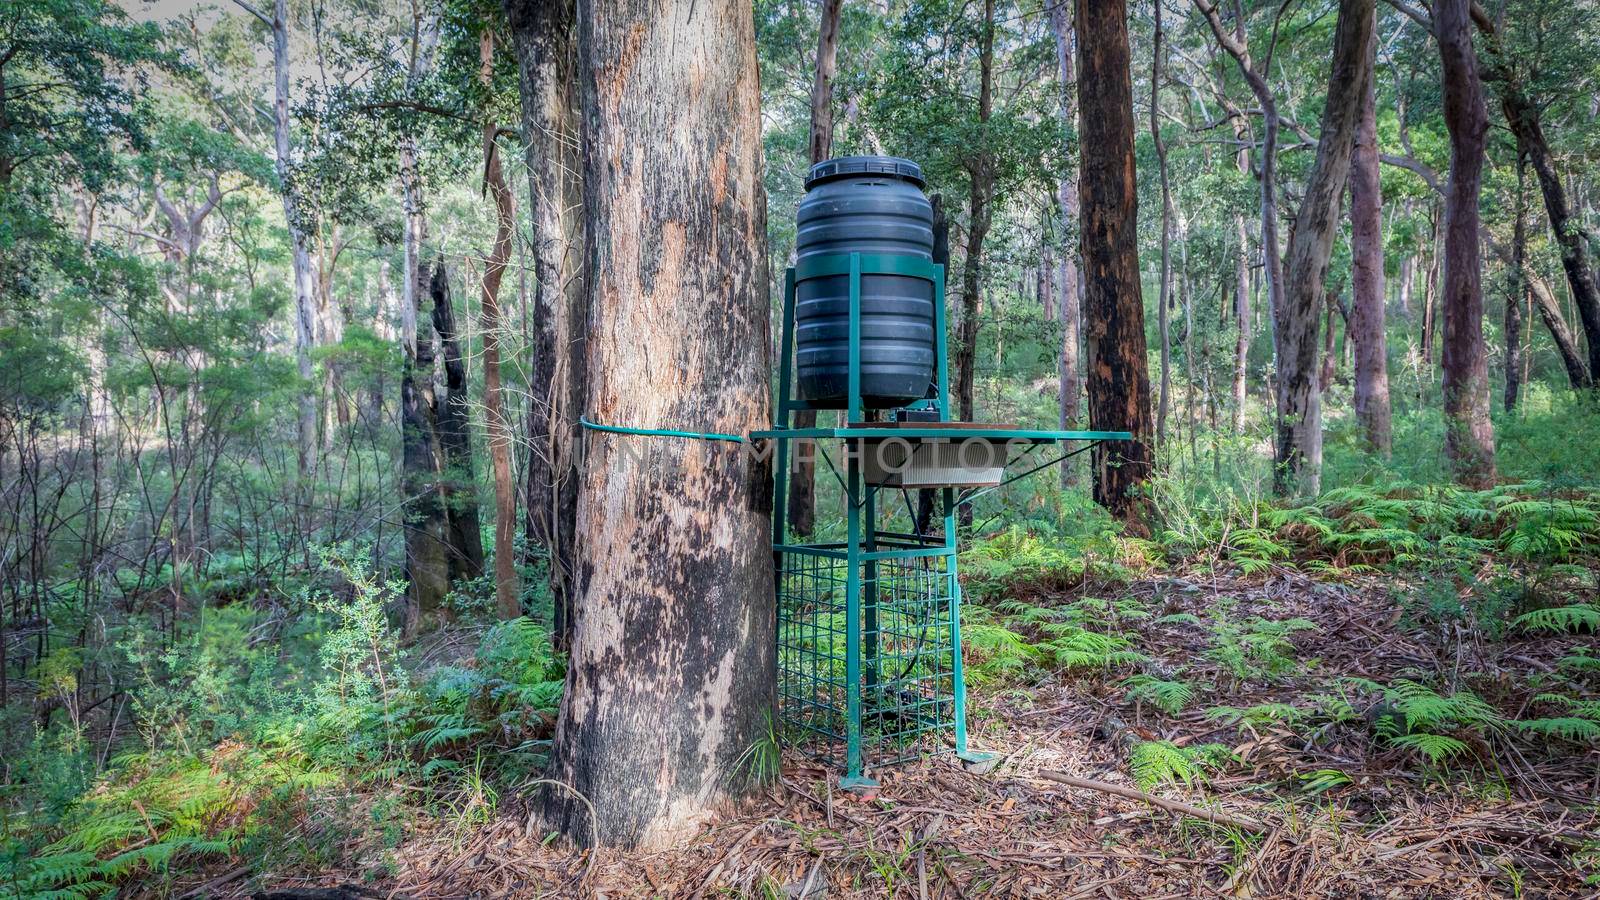 A wildlife watering system in the Australian National Parks program by WittkePhotos